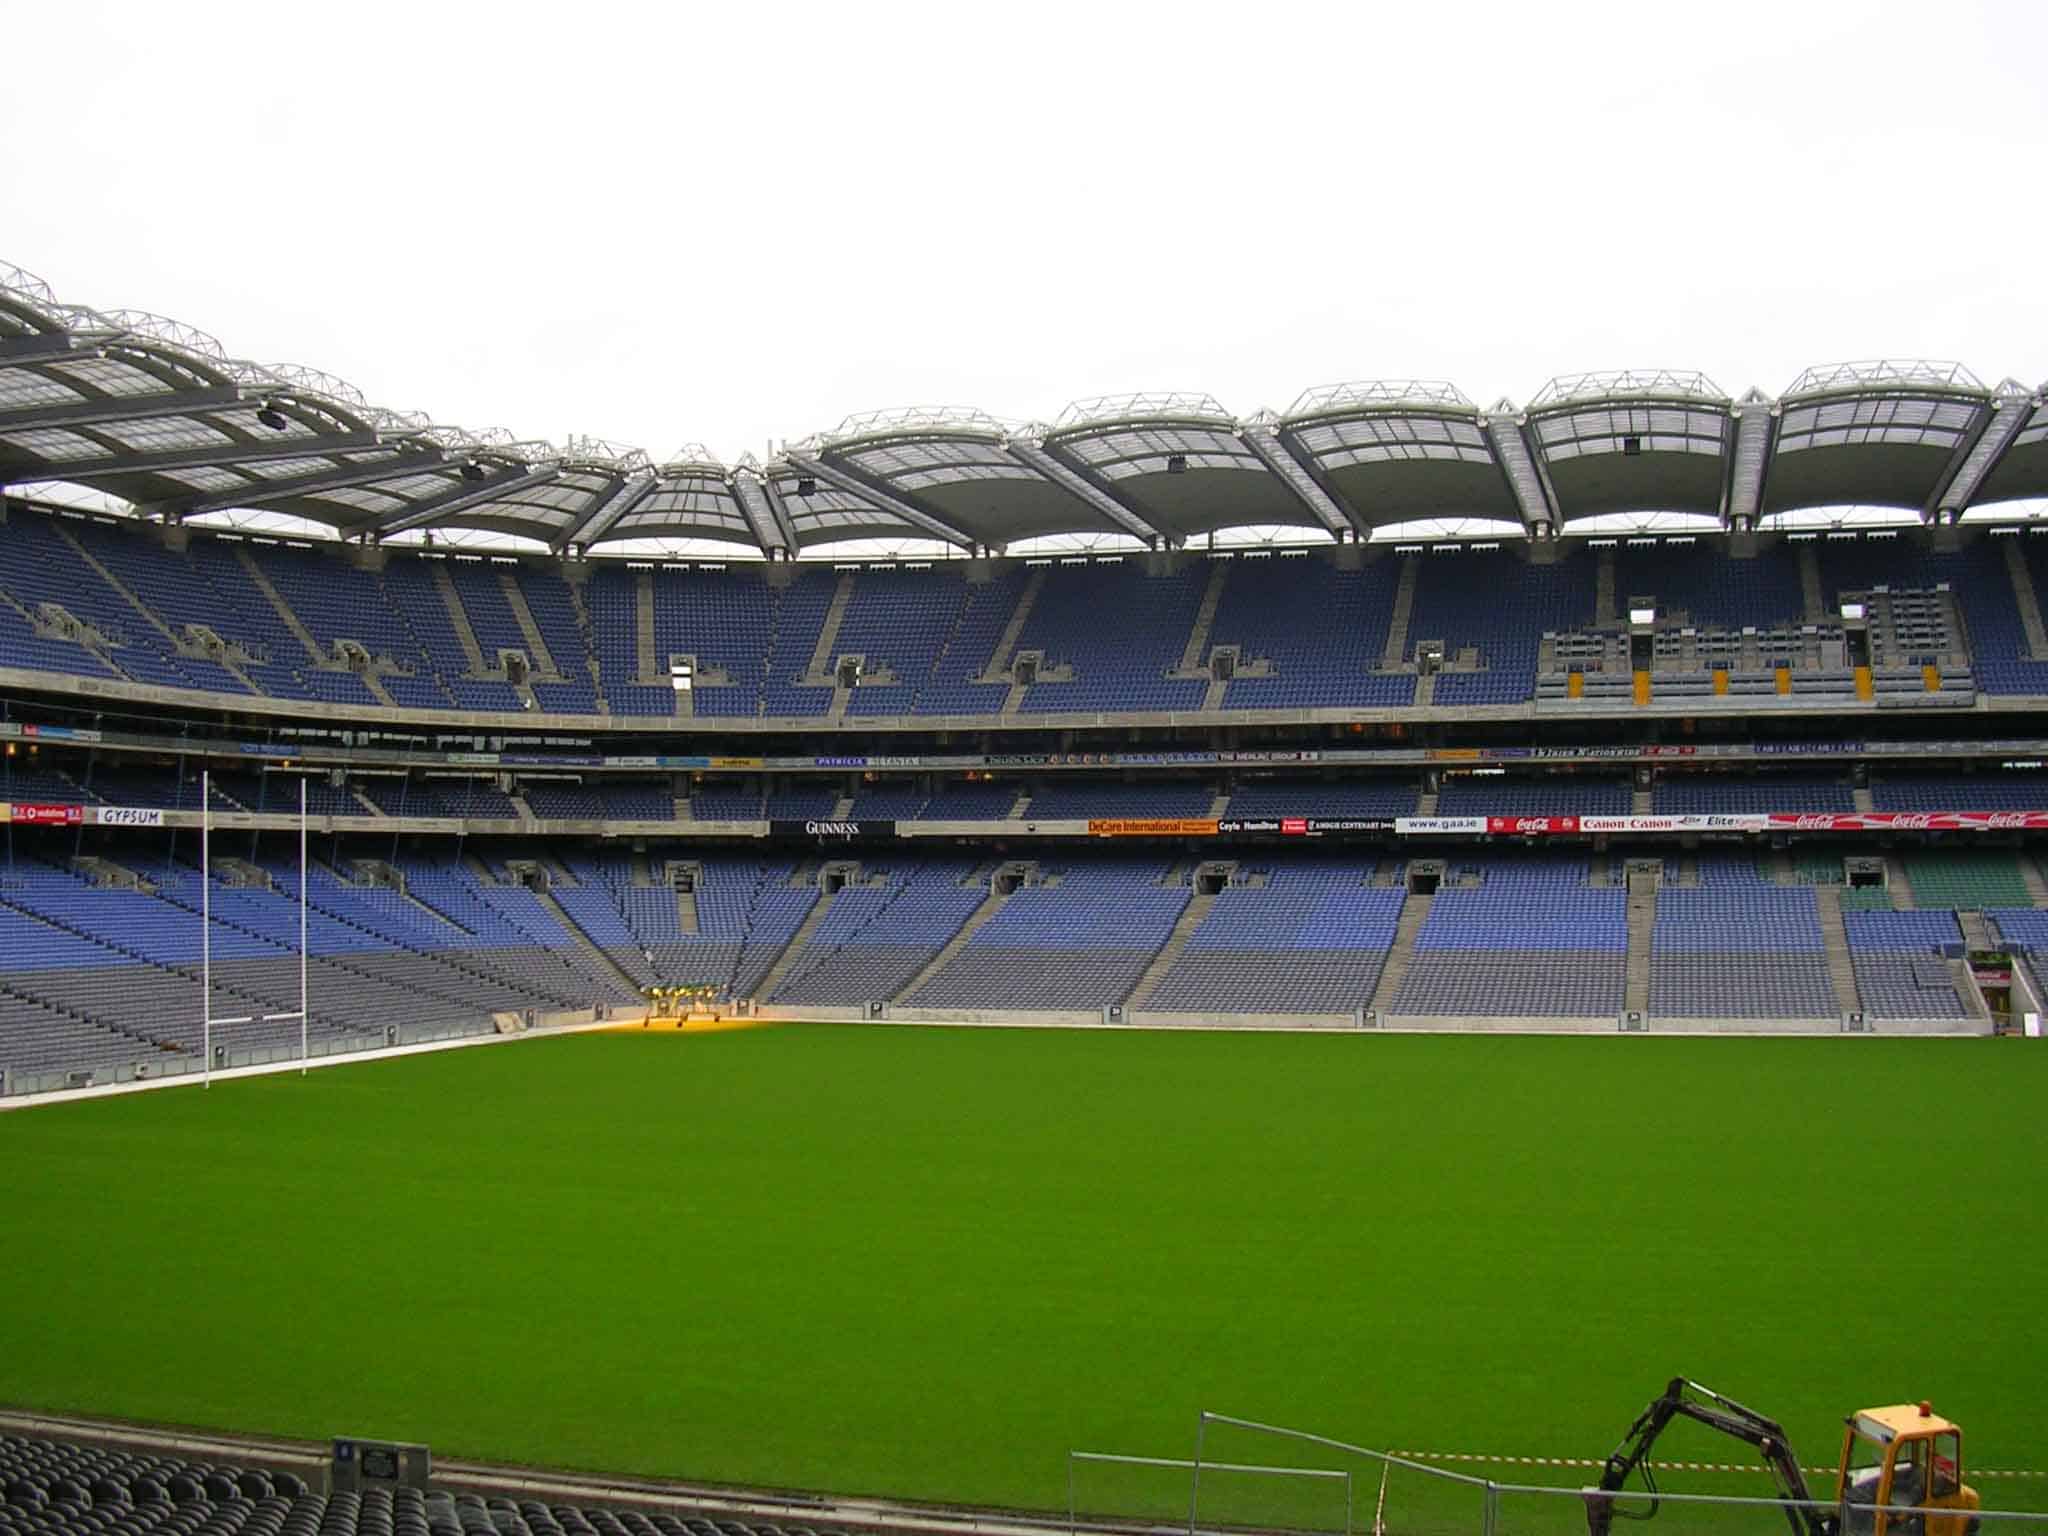 <p><strong>Year Construction Began:</strong> 1880</p>    <p><strong>Construction Completion:</strong> 1884</p>    <p>Europe’s third largest sports stadium is called Croke Park Stadium, and it's owned by the GAA, which is Ireland’s biggest sports organization. </p><p>Remember to scroll up and hit the ‘Follow’ button to keep up with the newest stories from Seattle Travel on your Microsoft Start feed or MSN homepage!</p>